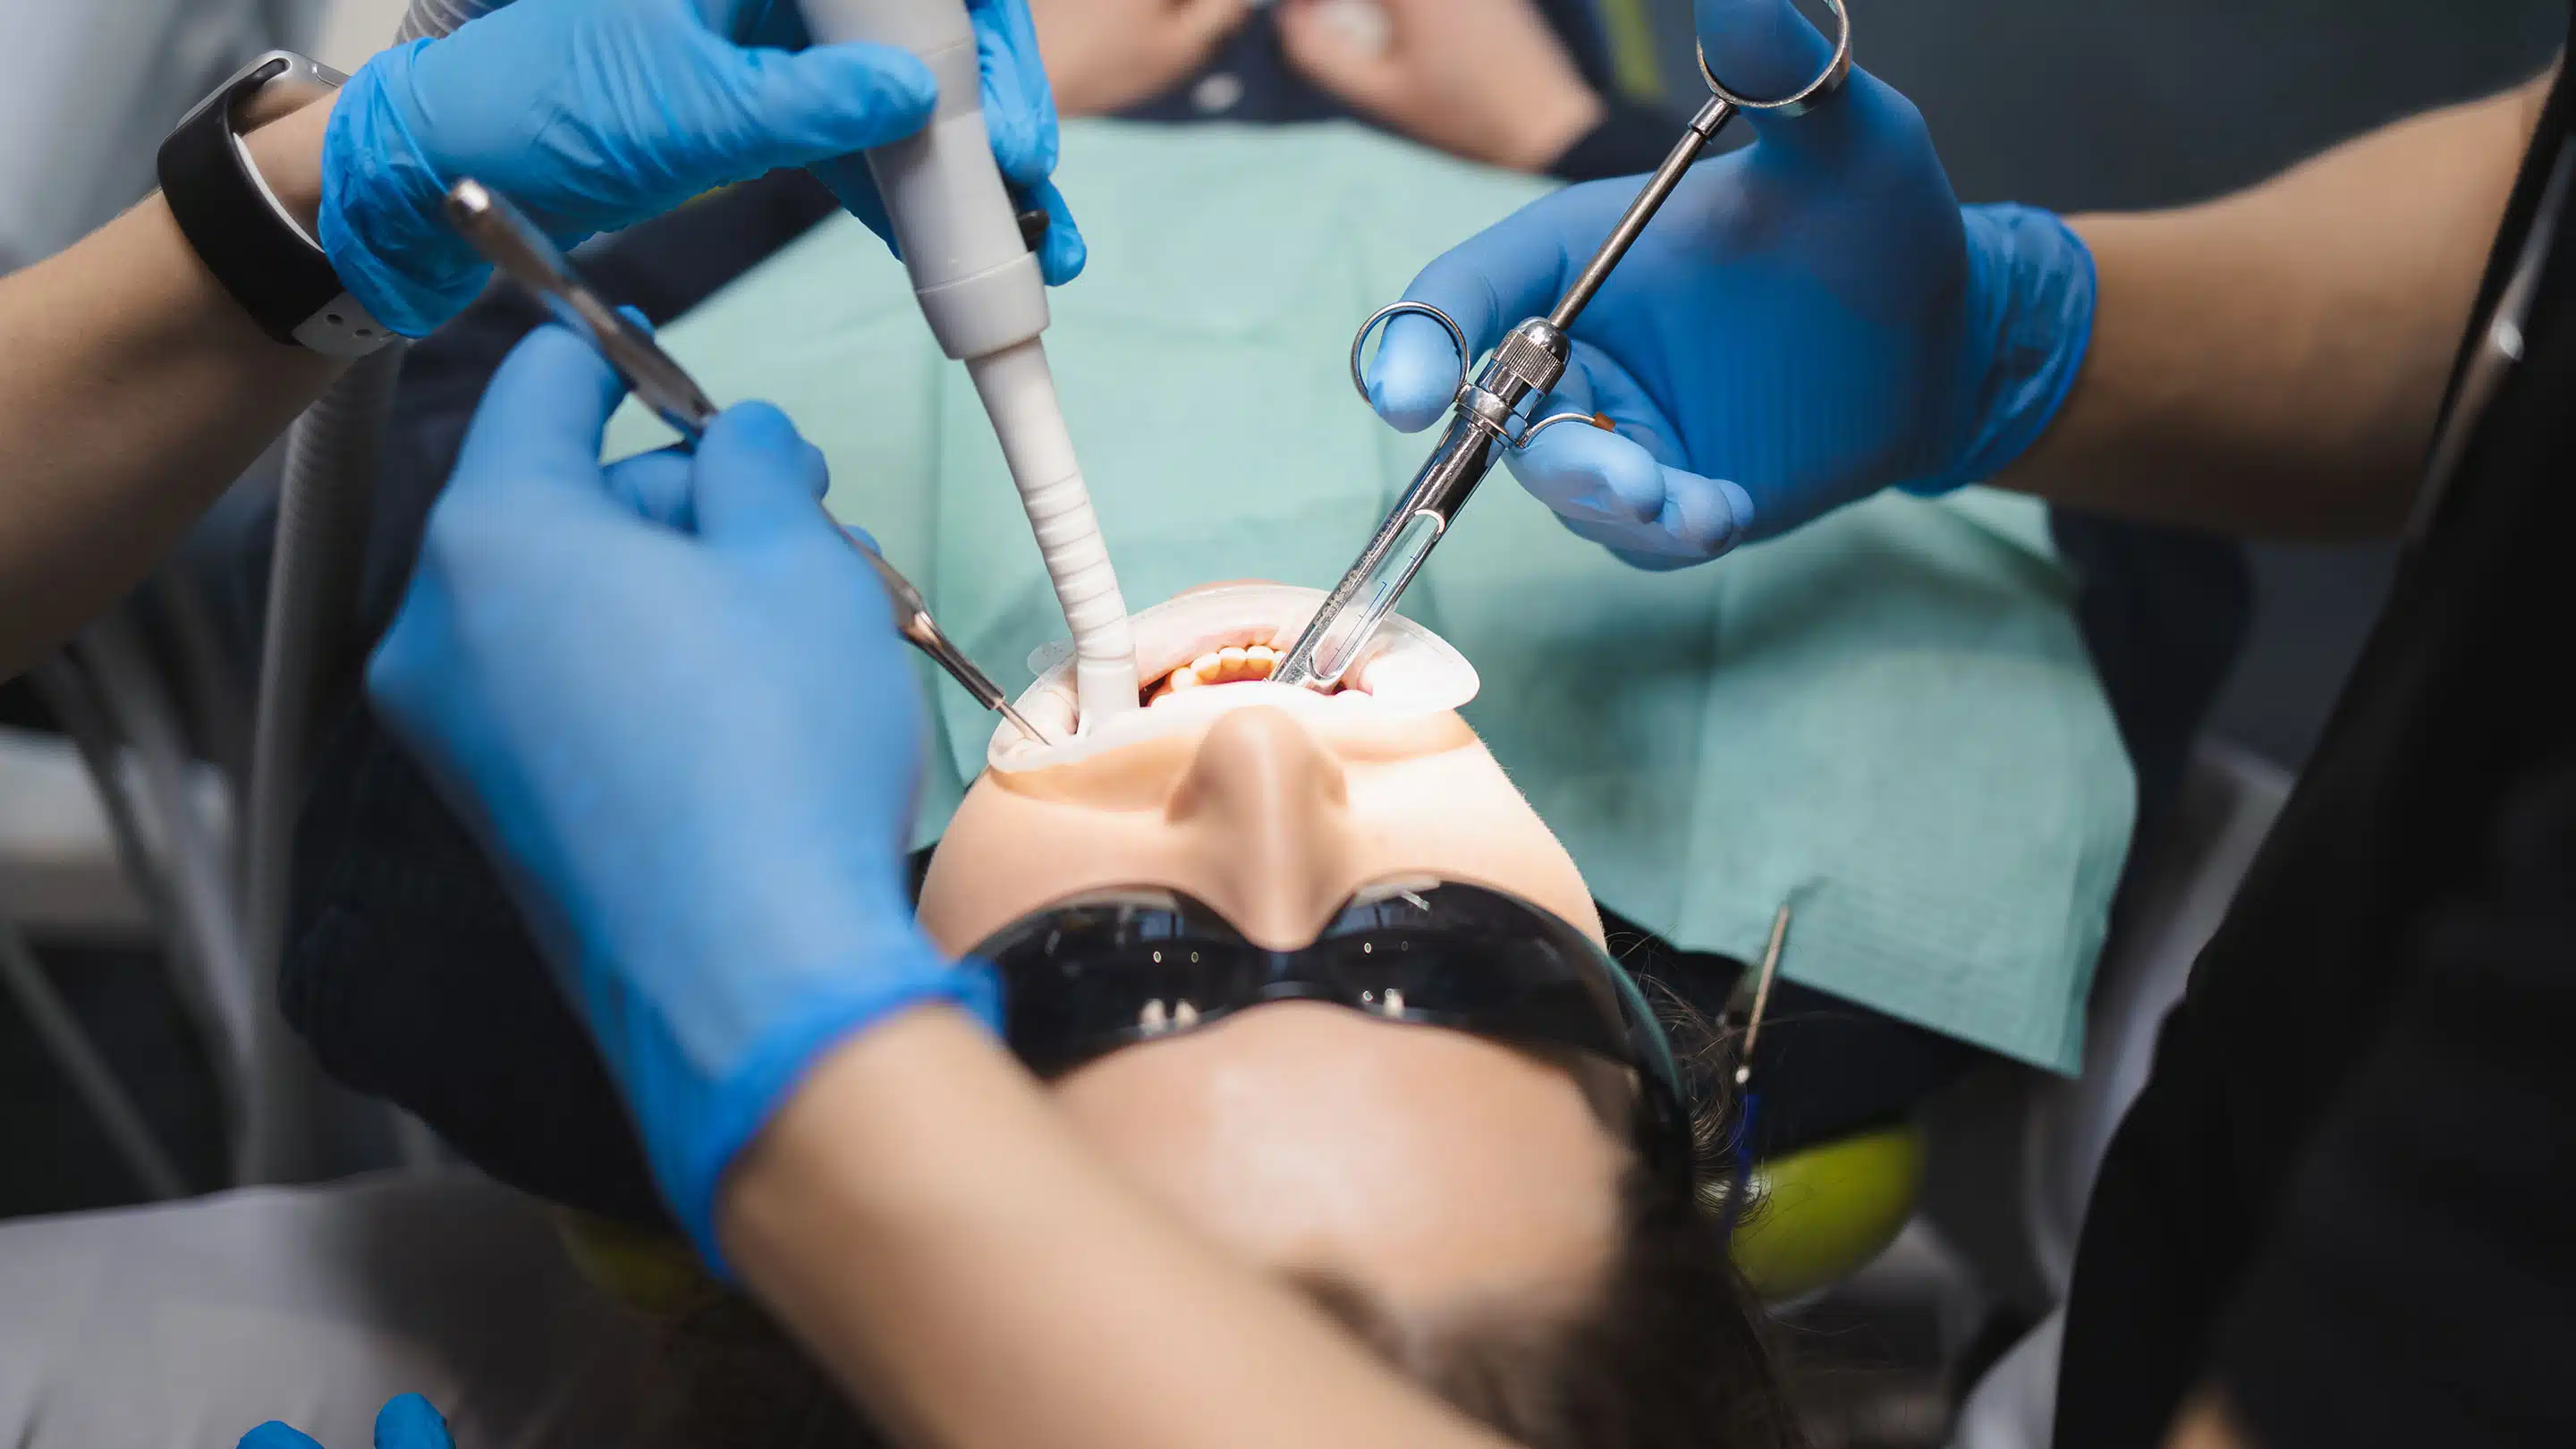 Dentist performing oral surgery and extraction